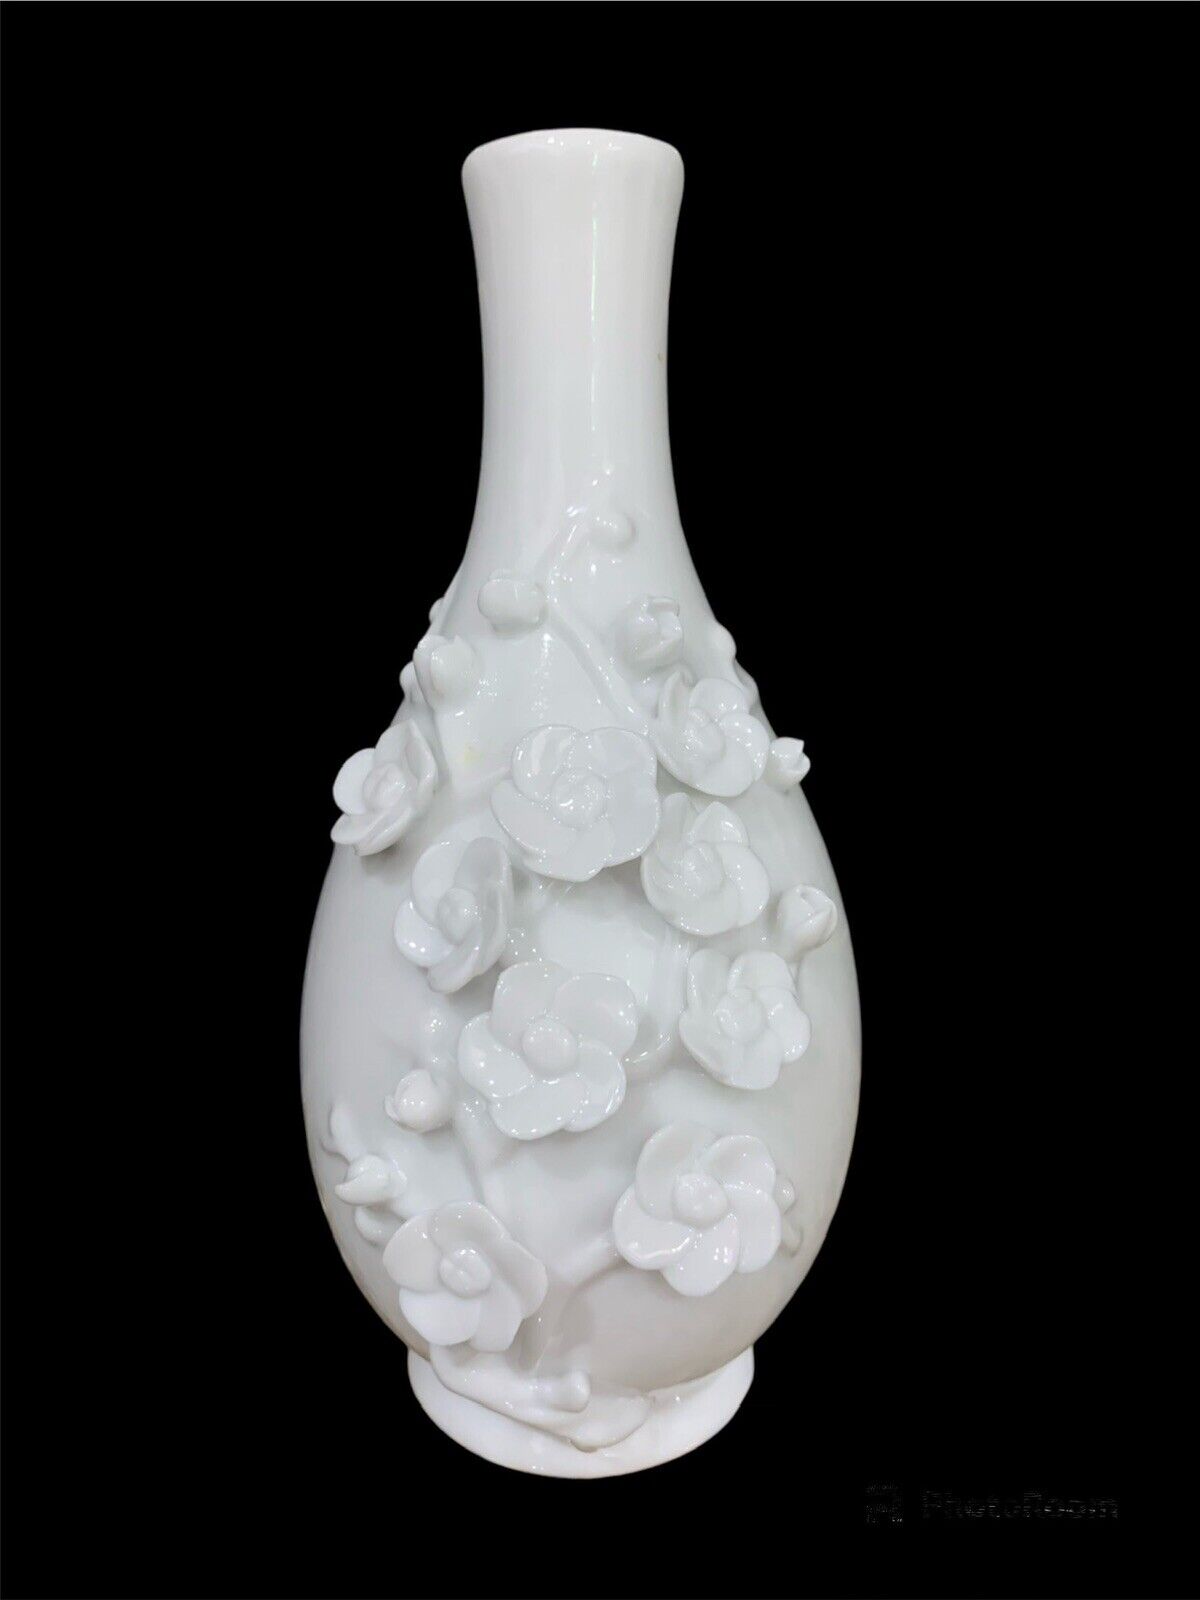 Vintage Raised Relief Handmade Flowers Bud Vase by Tozai Home 8” White Porcelain